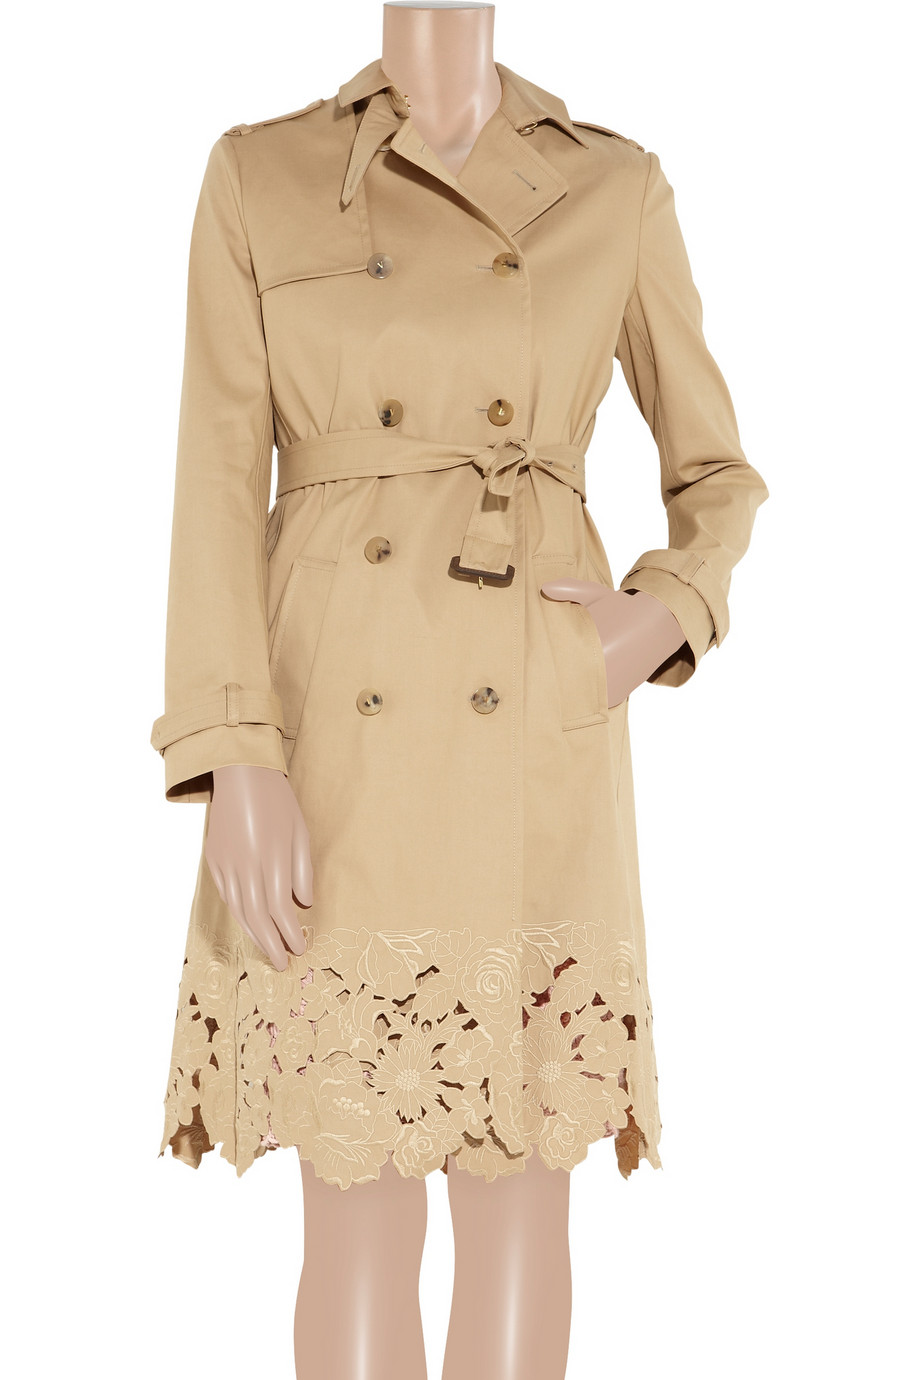 Lyst - Valentino Embroidered Cotton-gabardine Trench Coat in Natural